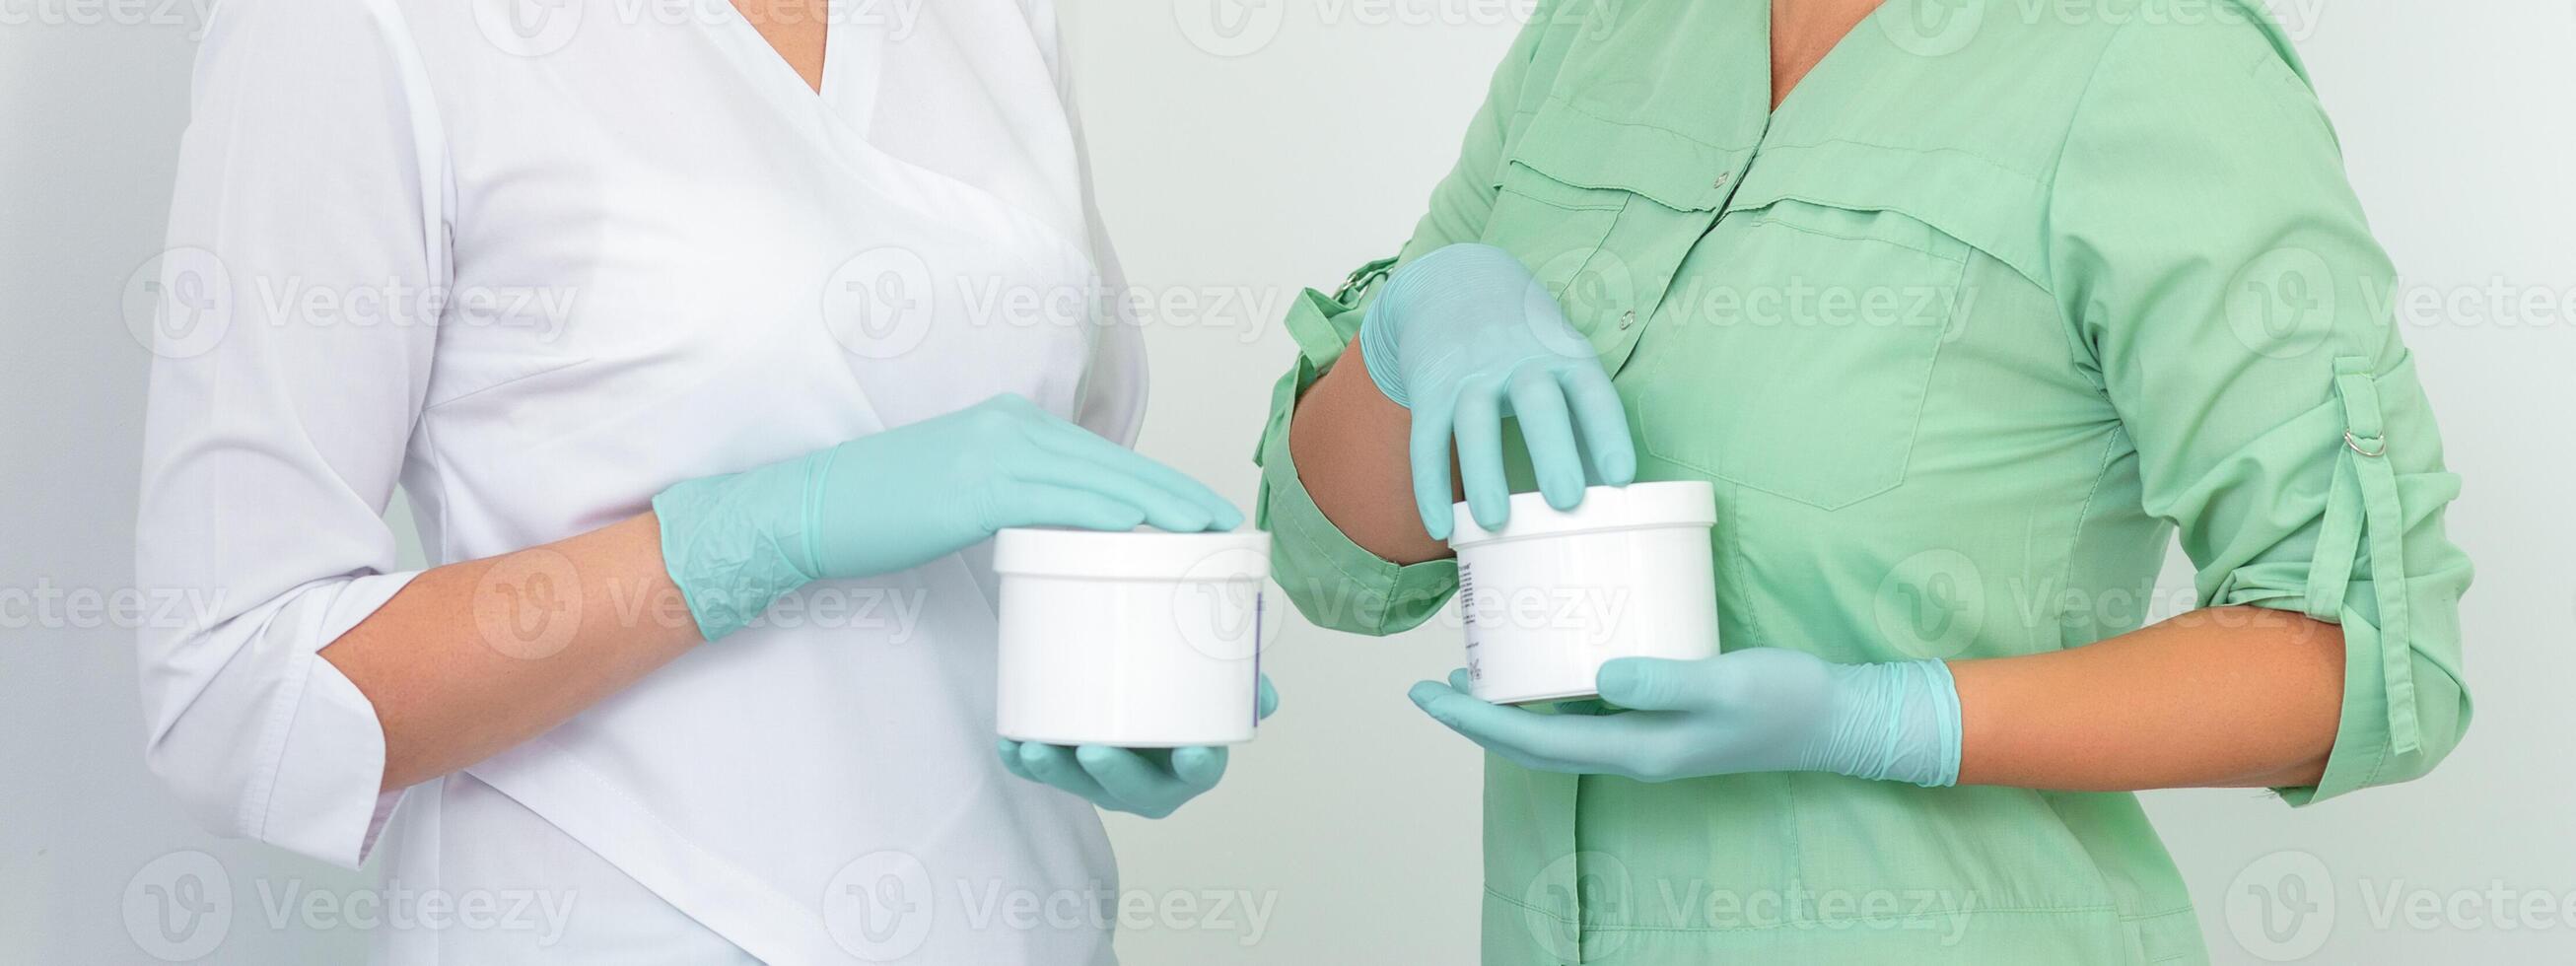 Two cosmeticians with jars of wax for depilation smiling against a white background. Natural product for hair removal. Copy space. photo